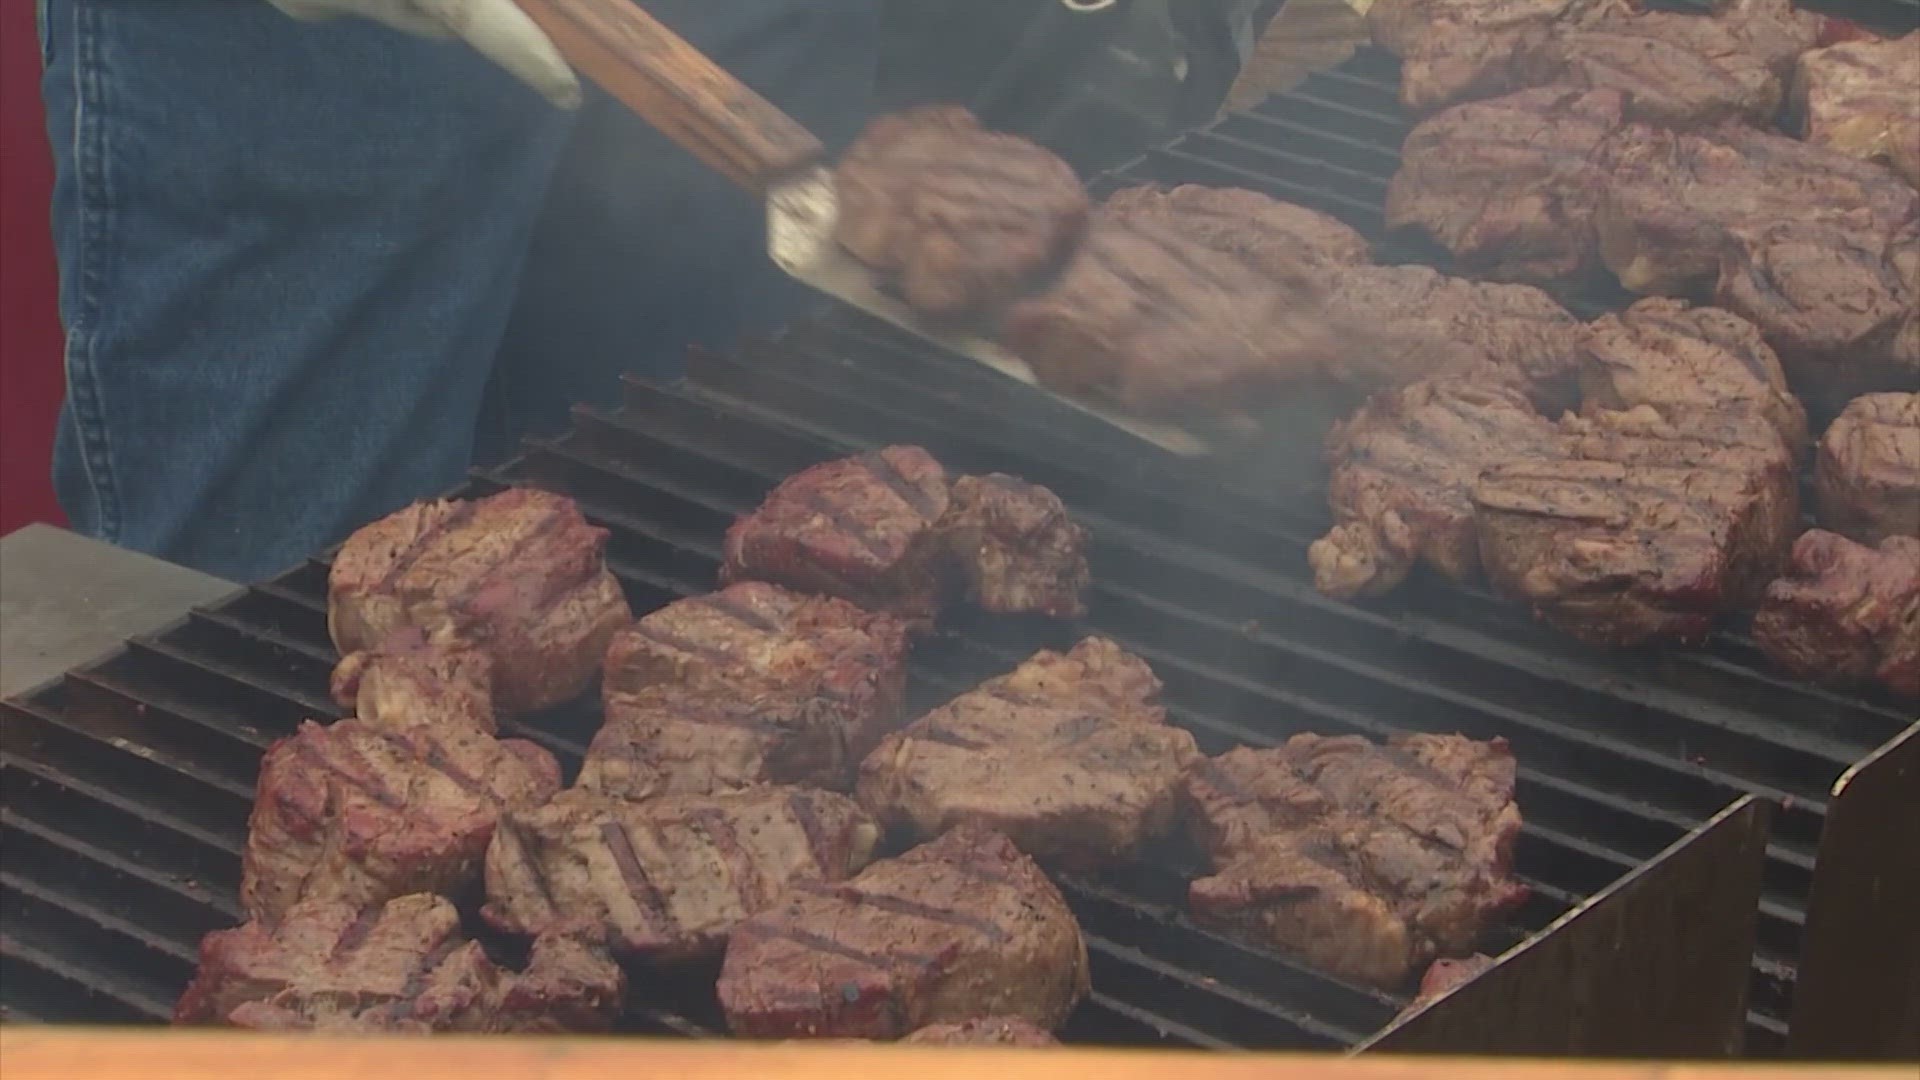 More than 250 teams from Texas and around the world are competing for the best brisket, chicken and ribs. The carnival is also open and the rodeo starts next week!